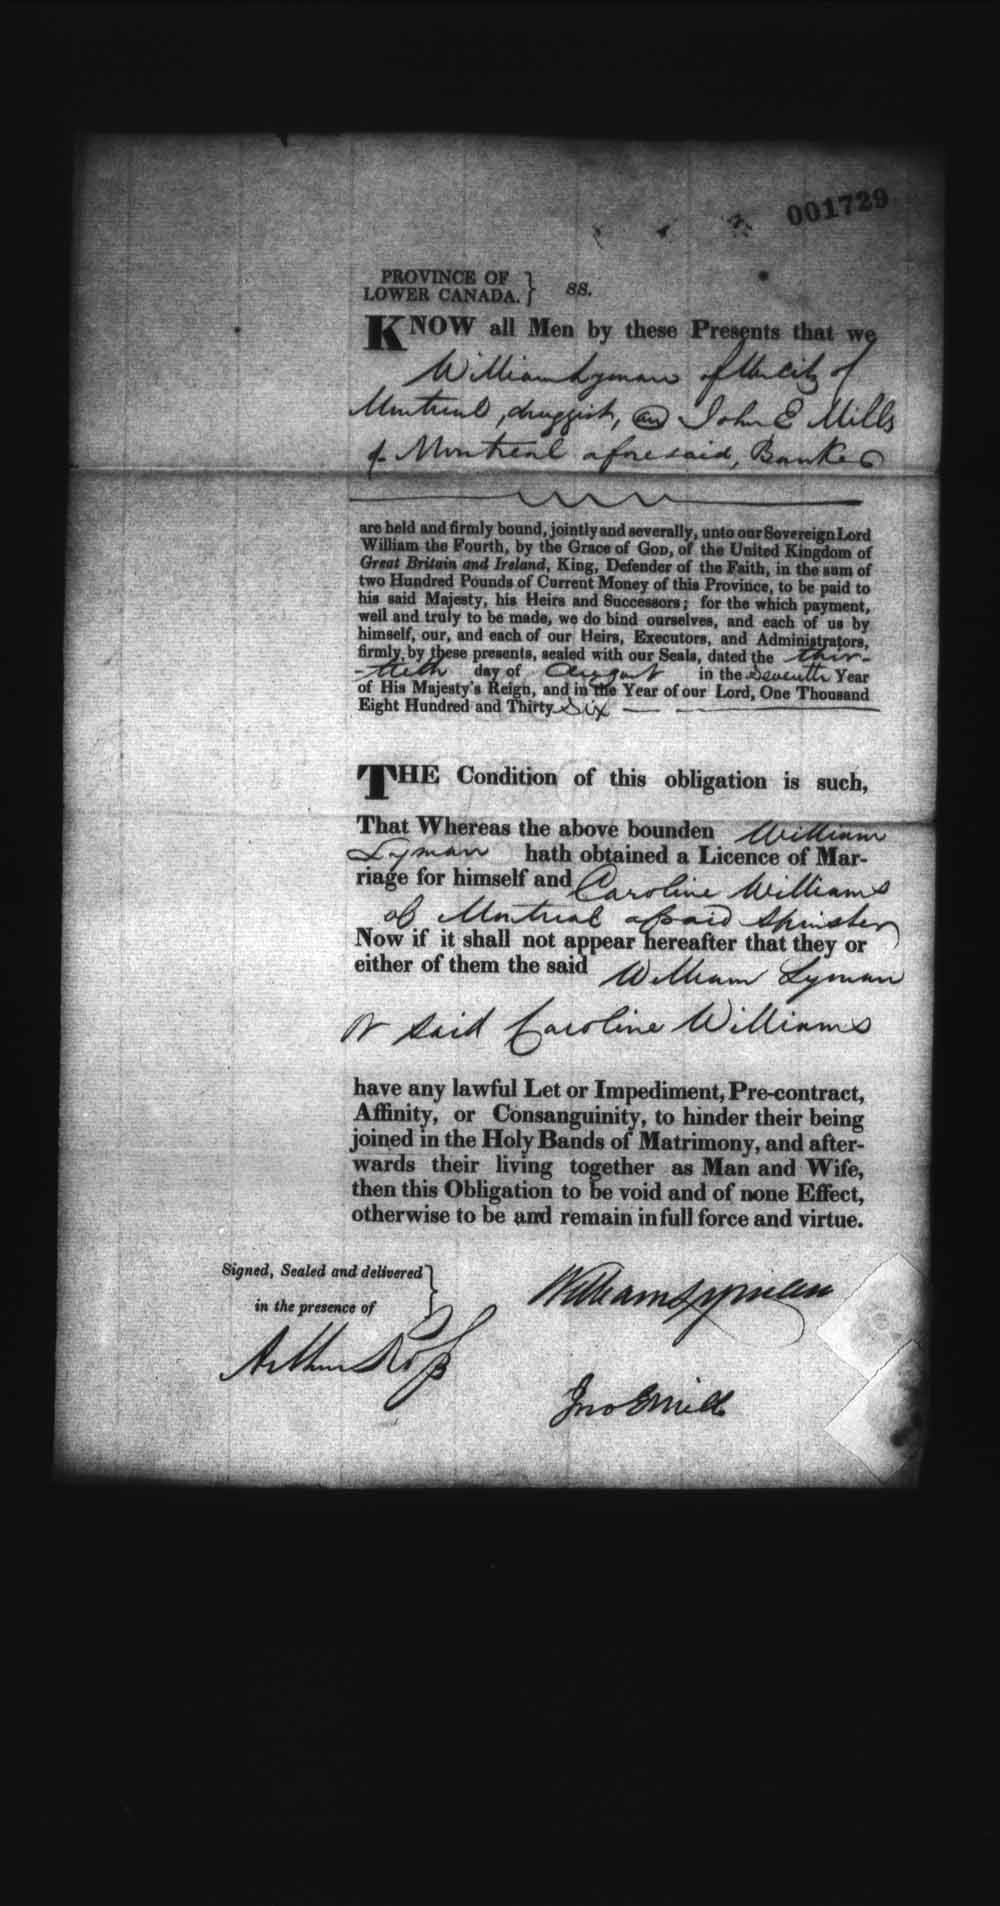 Digitized page of Upper and Lower Canada Marriage Bonds (1779-1865) for Image No.: e008238055